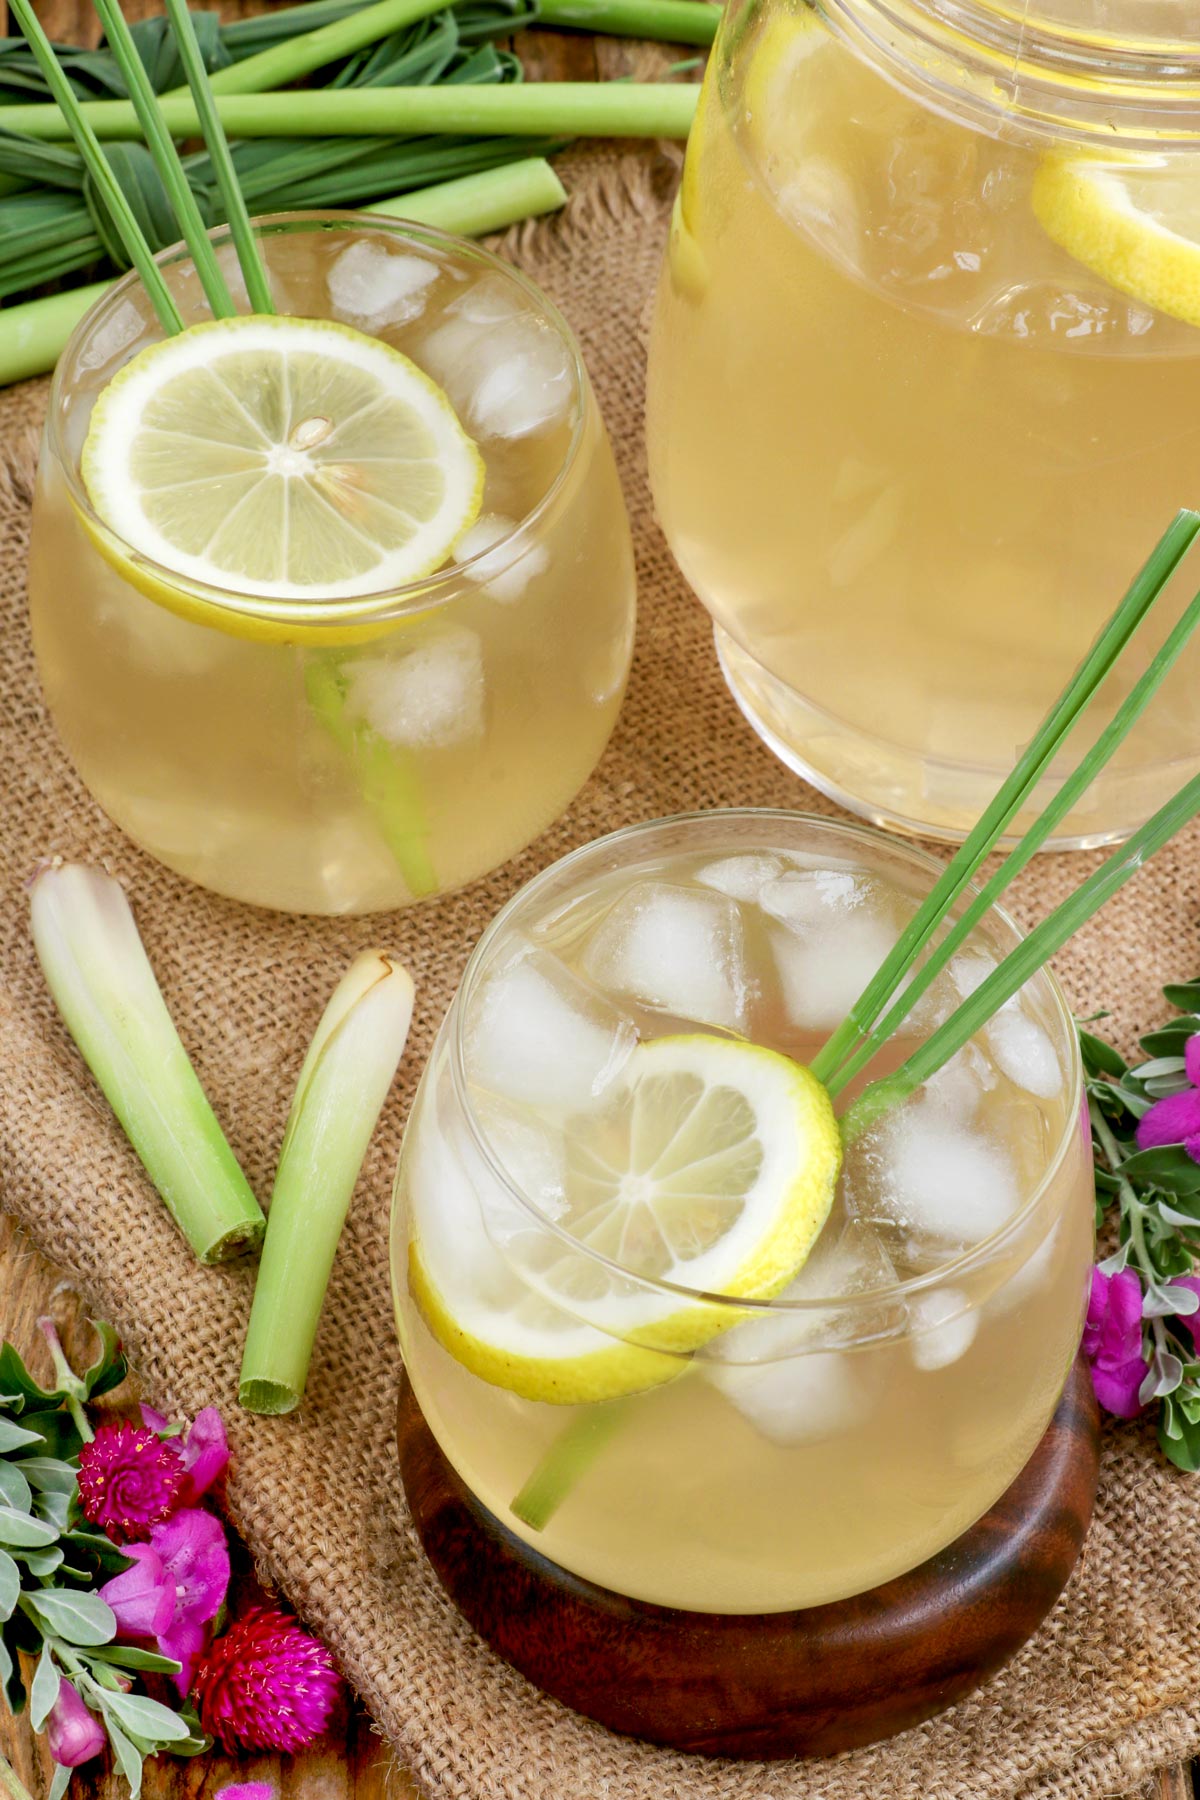 Refreshingly delicious and healthy Lemongrass and Ginger Juice.